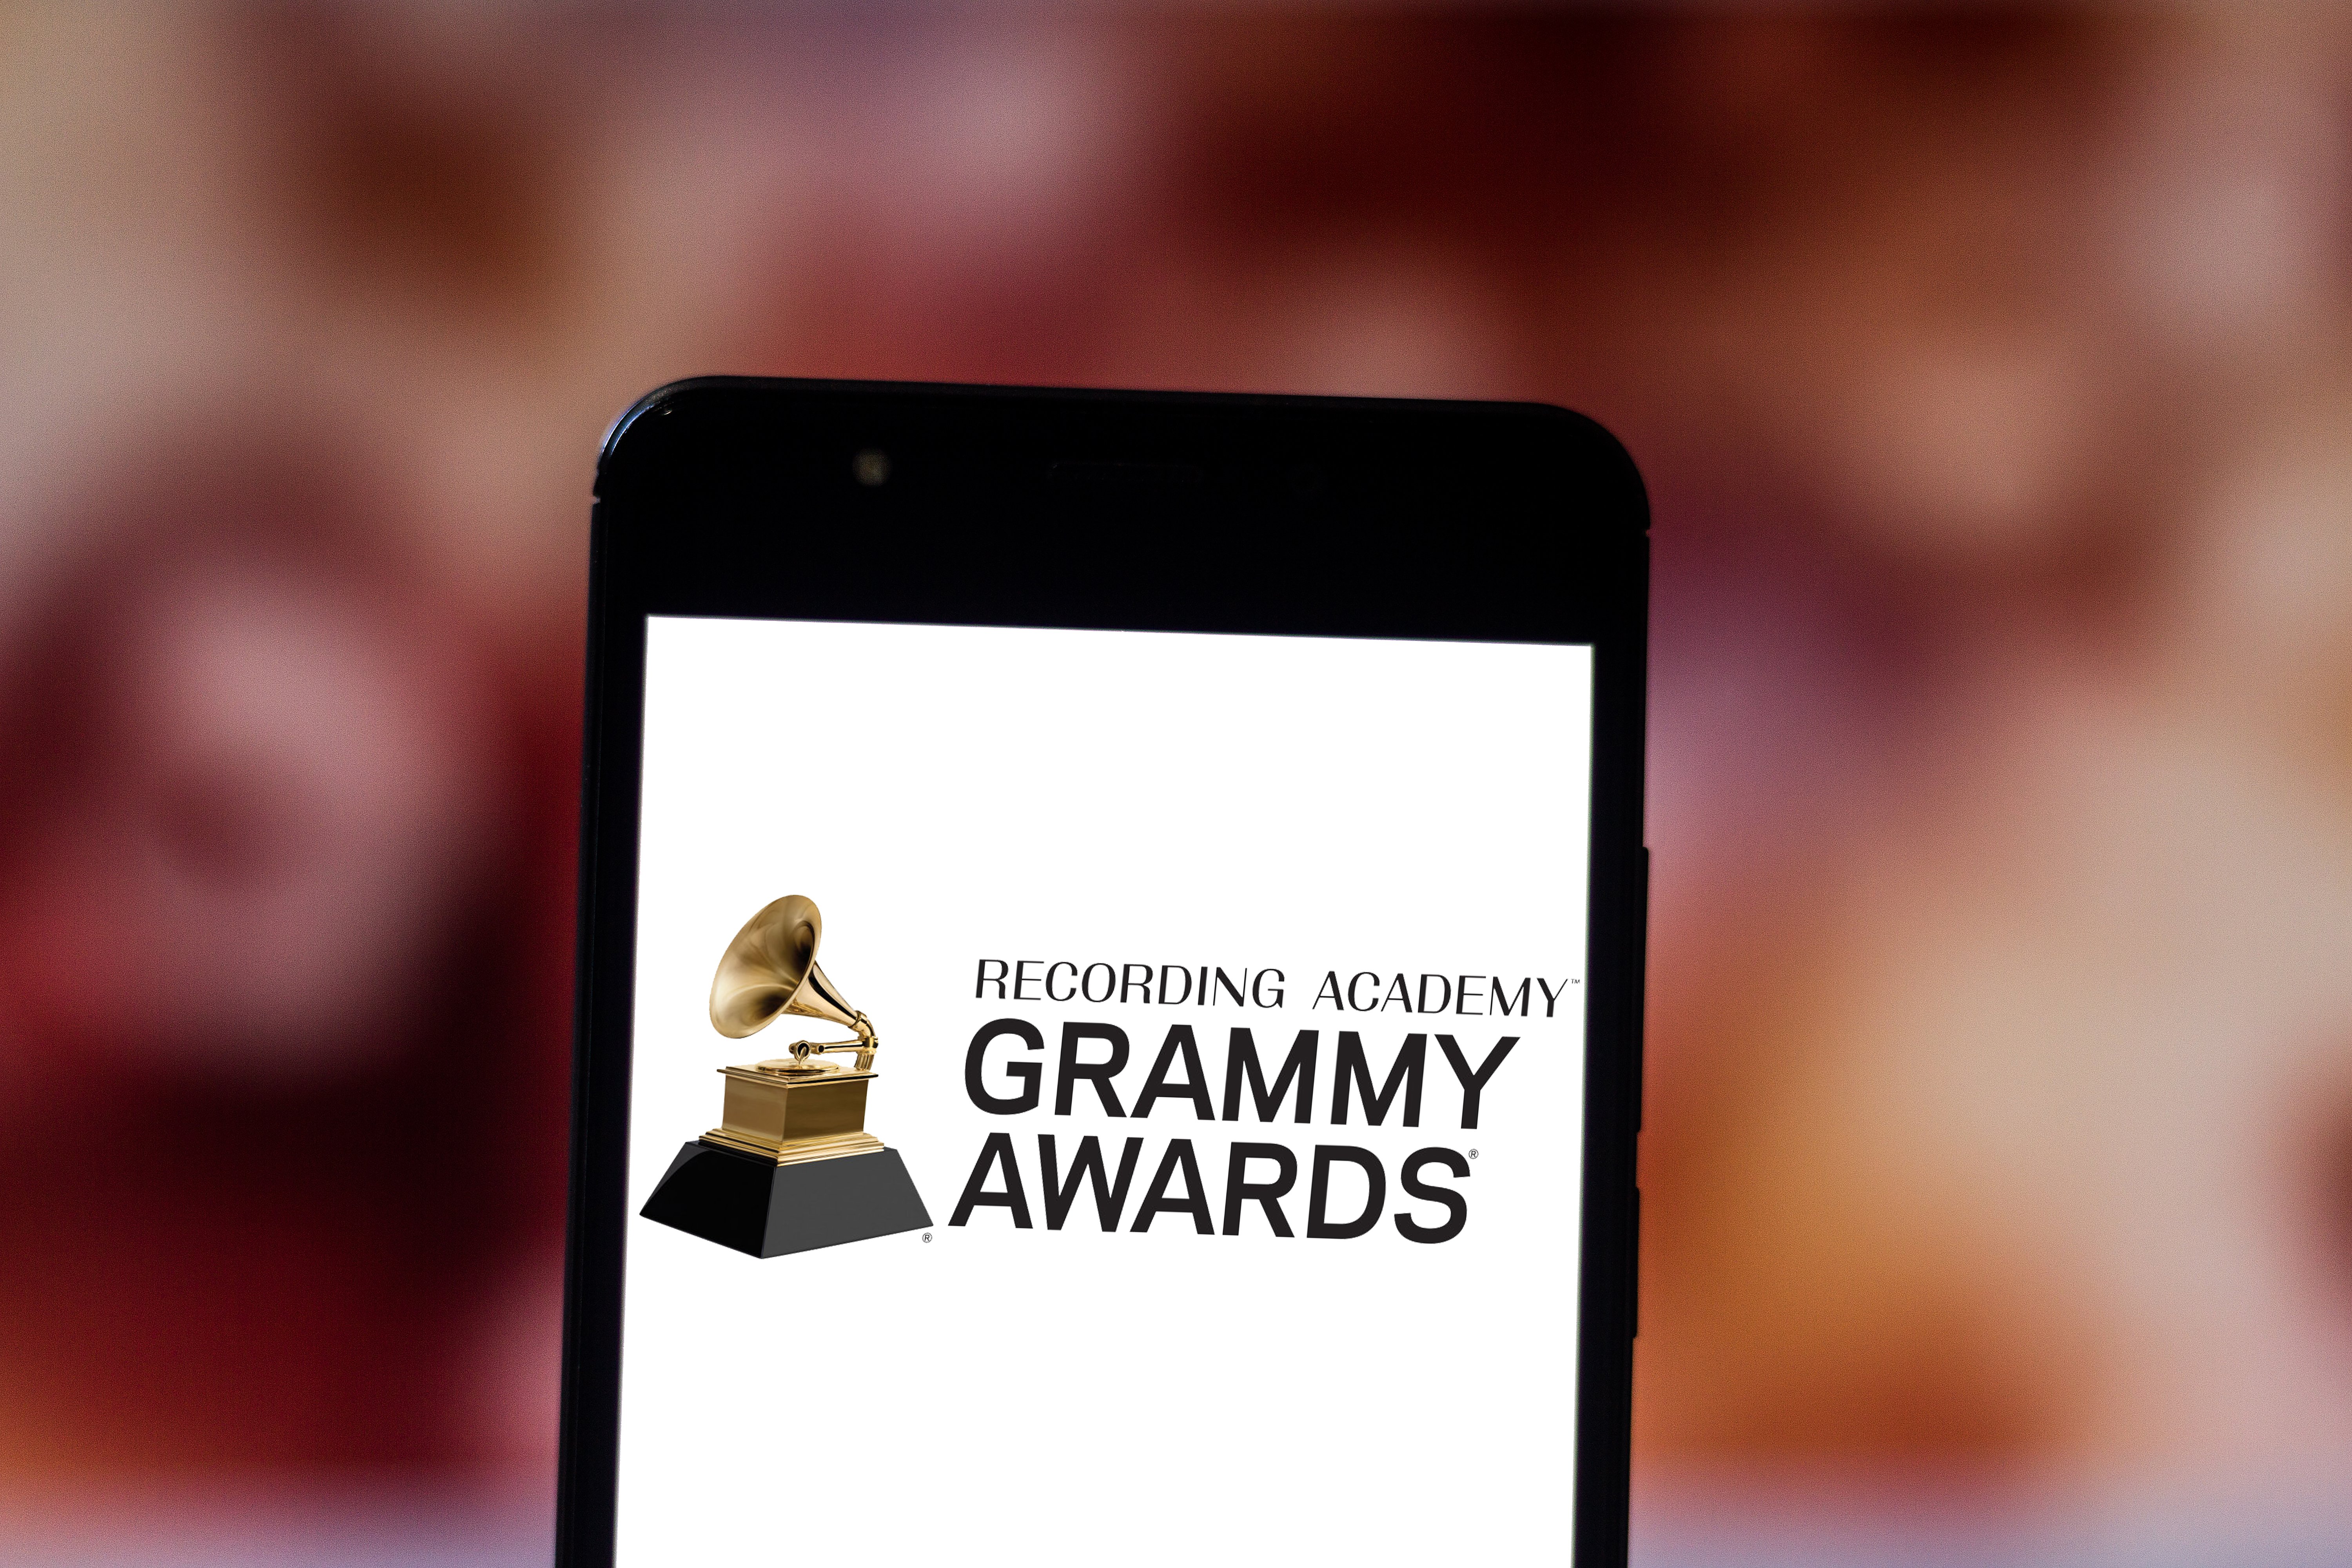 The Grammy Awards logo is displayed on a smartphone in Brazil, June 19, 2019 | Photo: Shutterstock